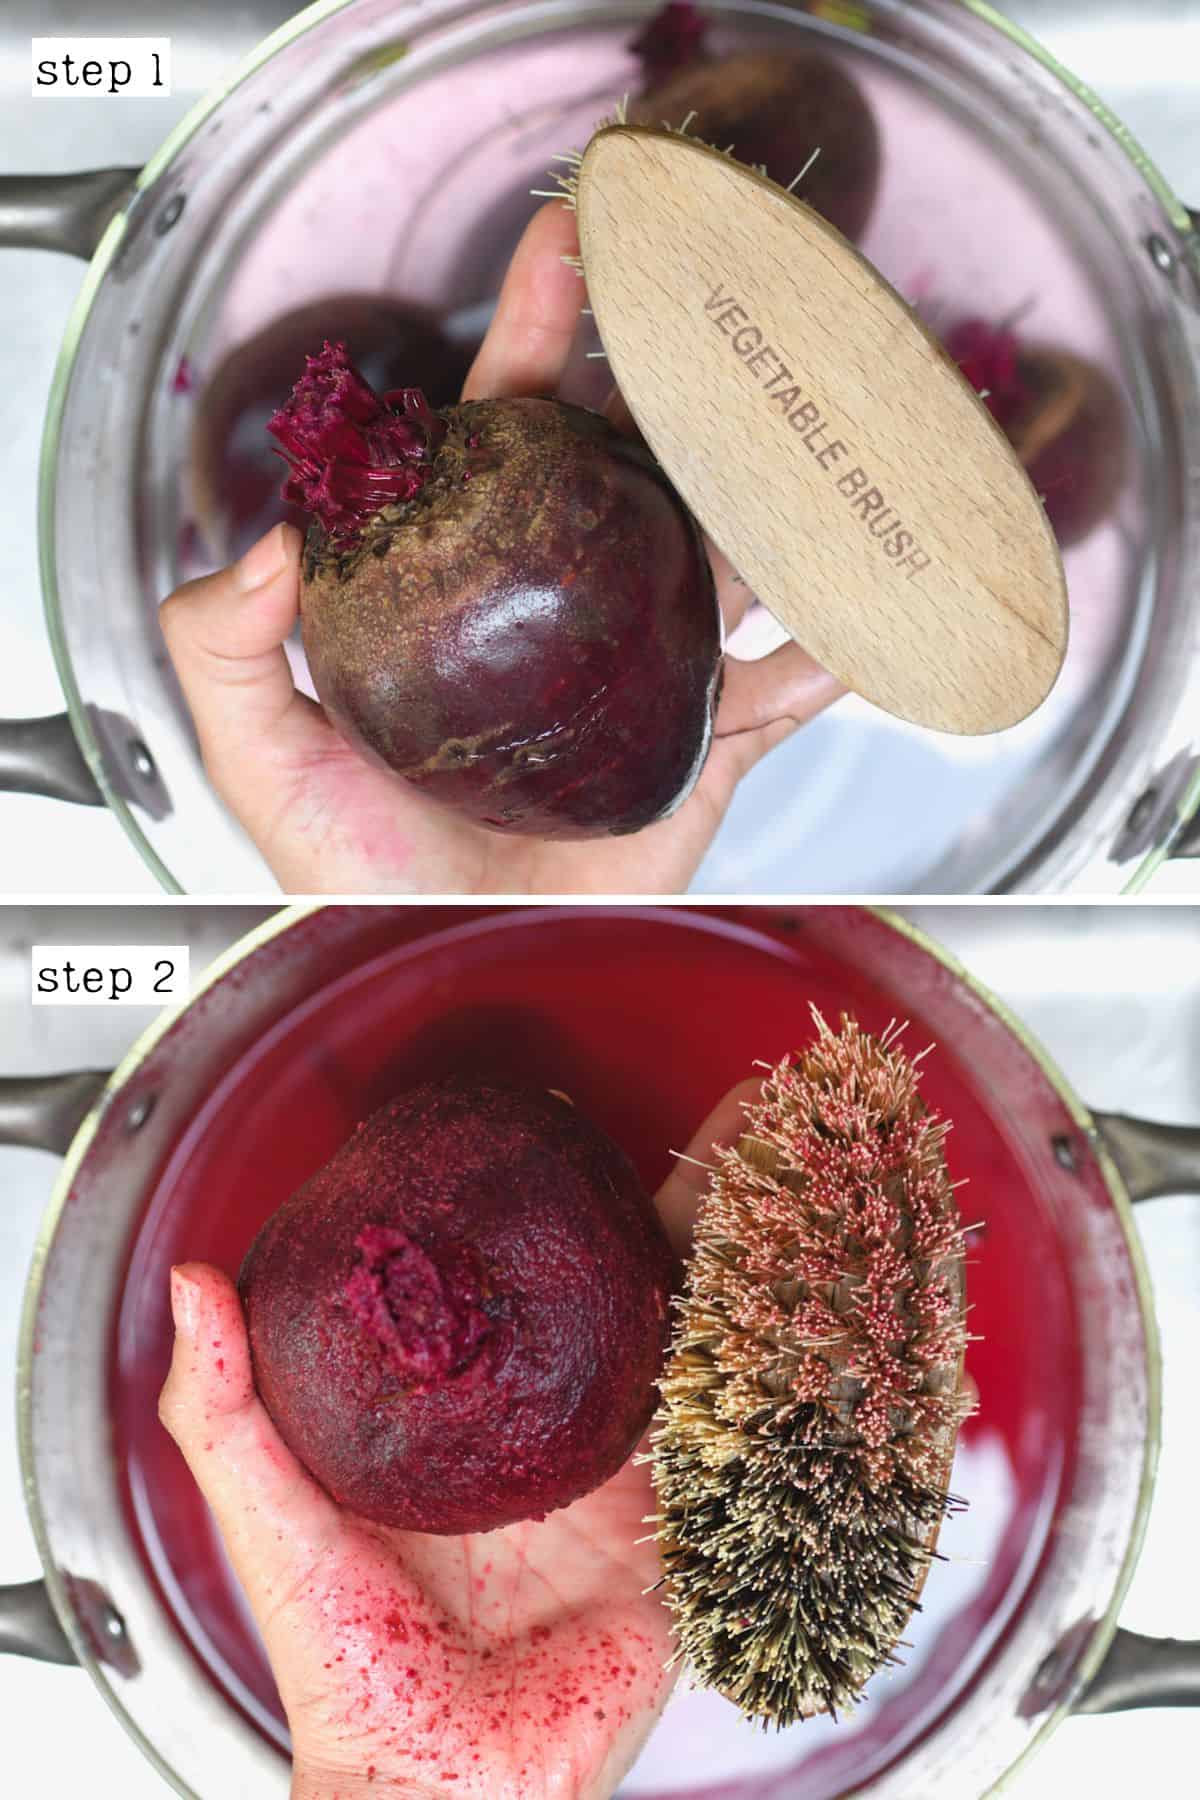 Steps for brushing beets